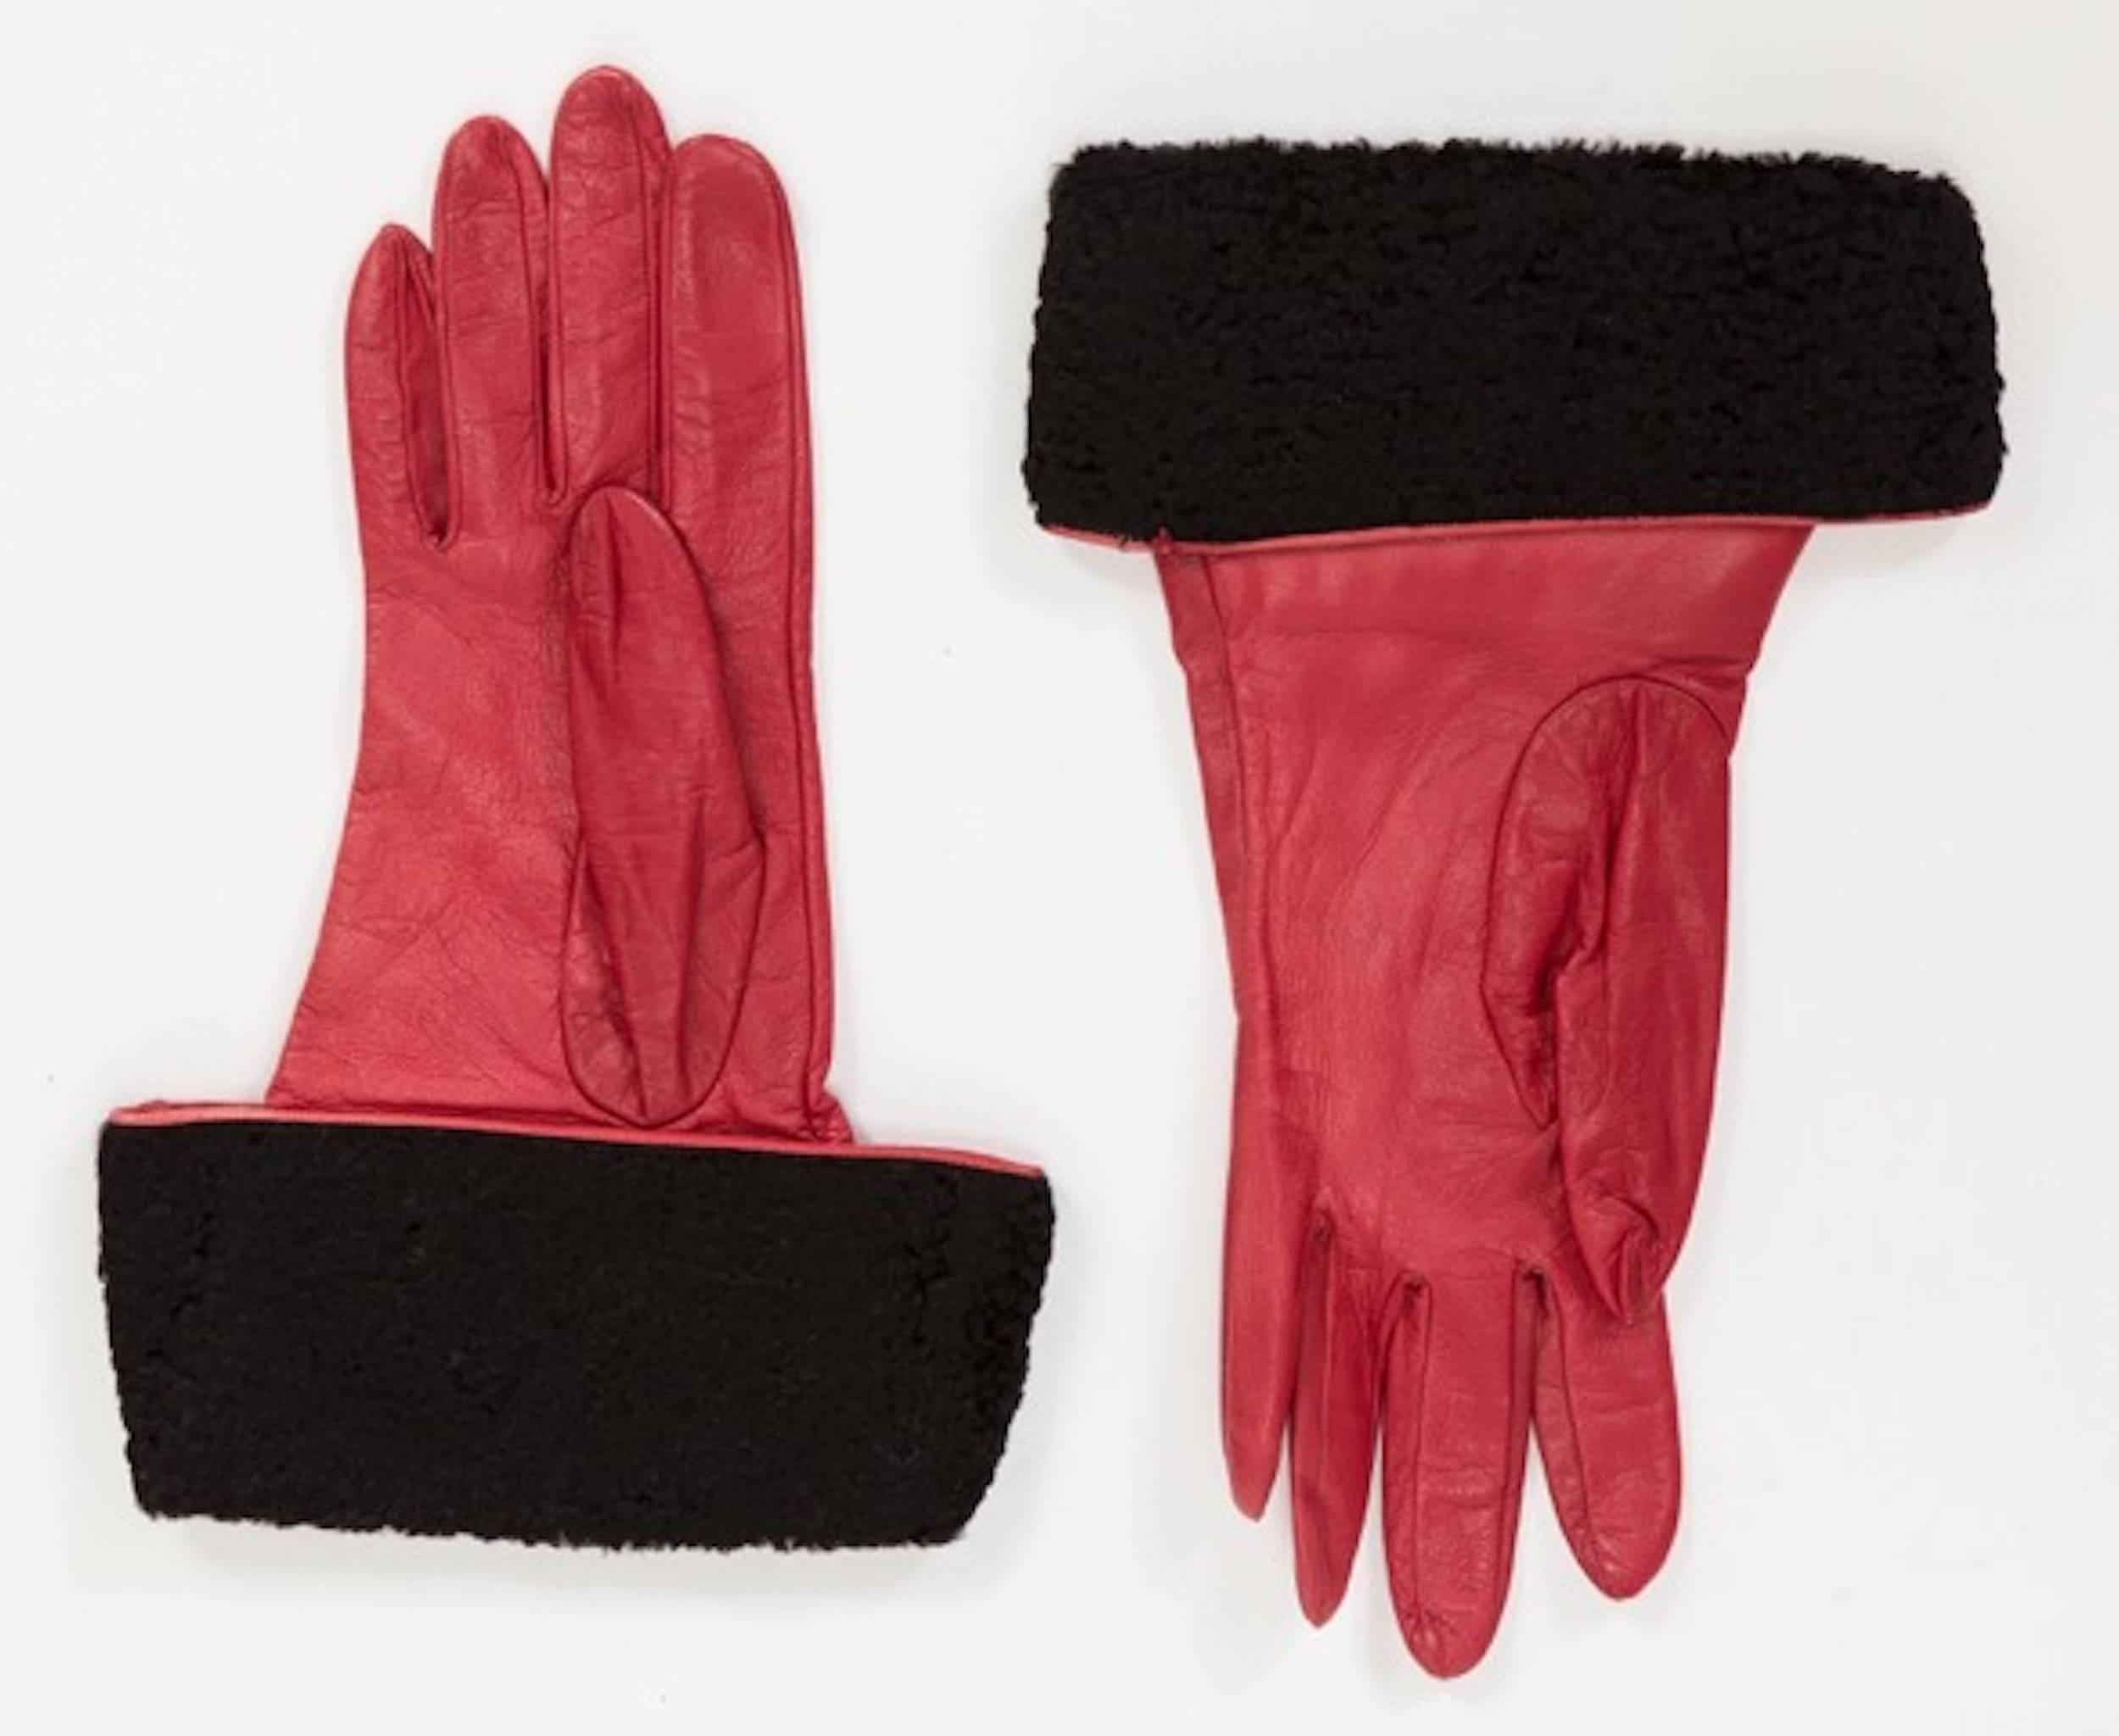 Yves Saint Laurent red leather gloves w/black sheared Mongolian fur trim at cuffs. In excellent condition. Size 7.5. 